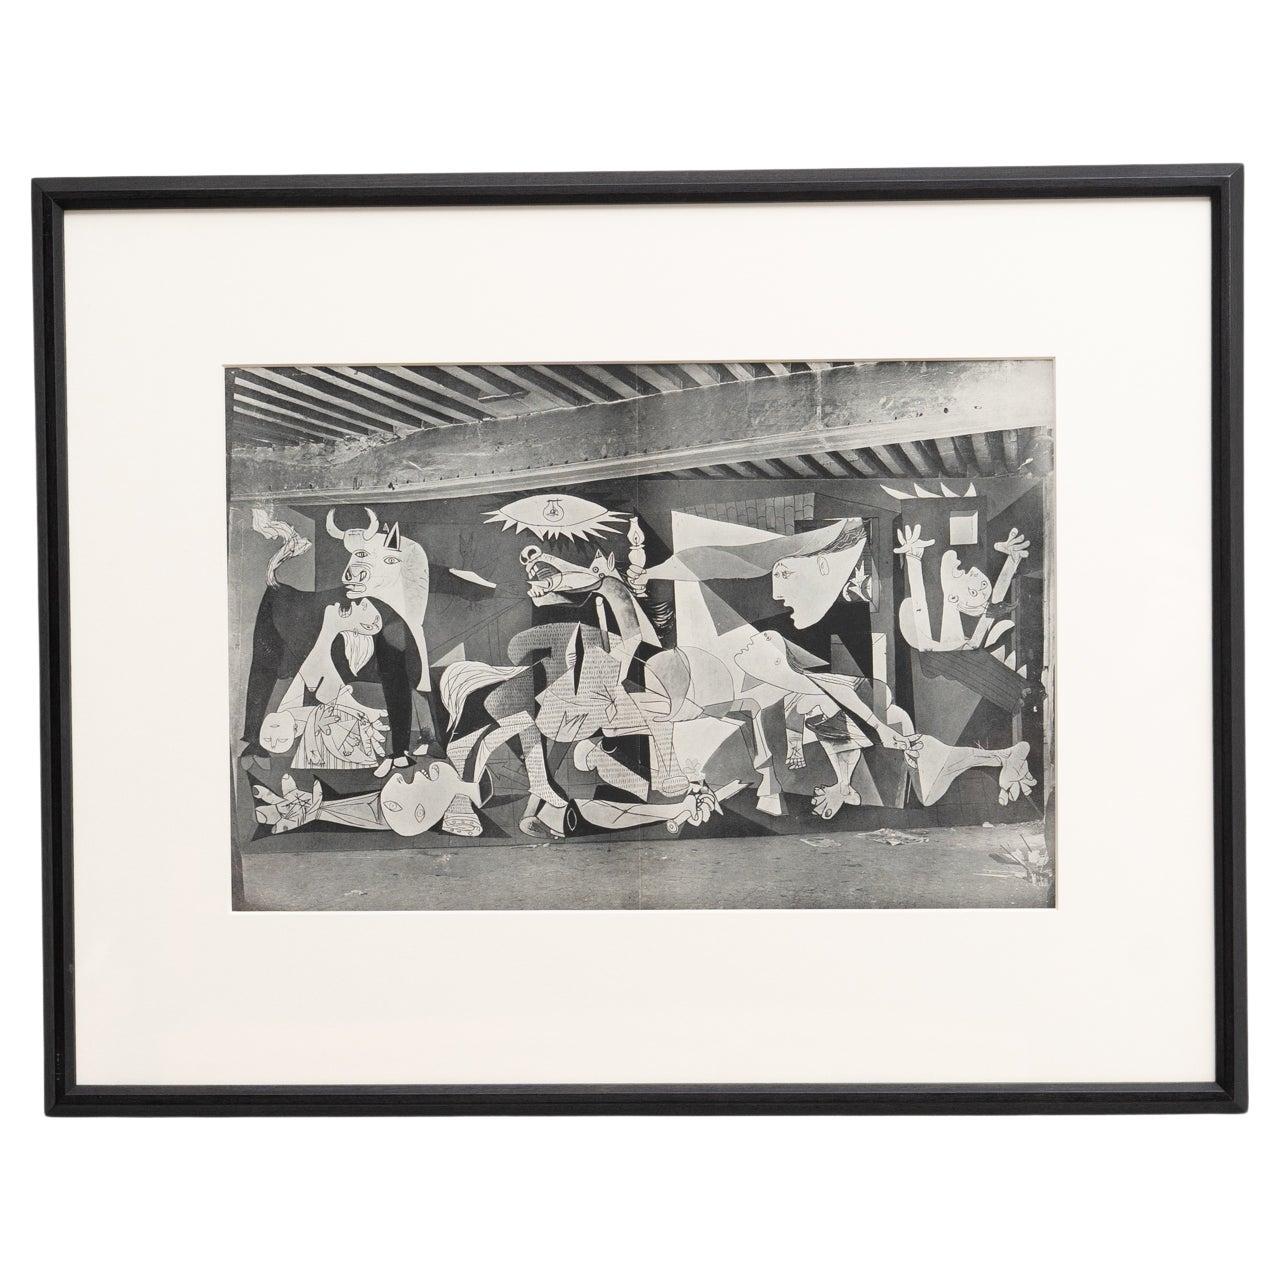 Picasso's "Guernica, " from Verve 'Photograph by Dora Maar'